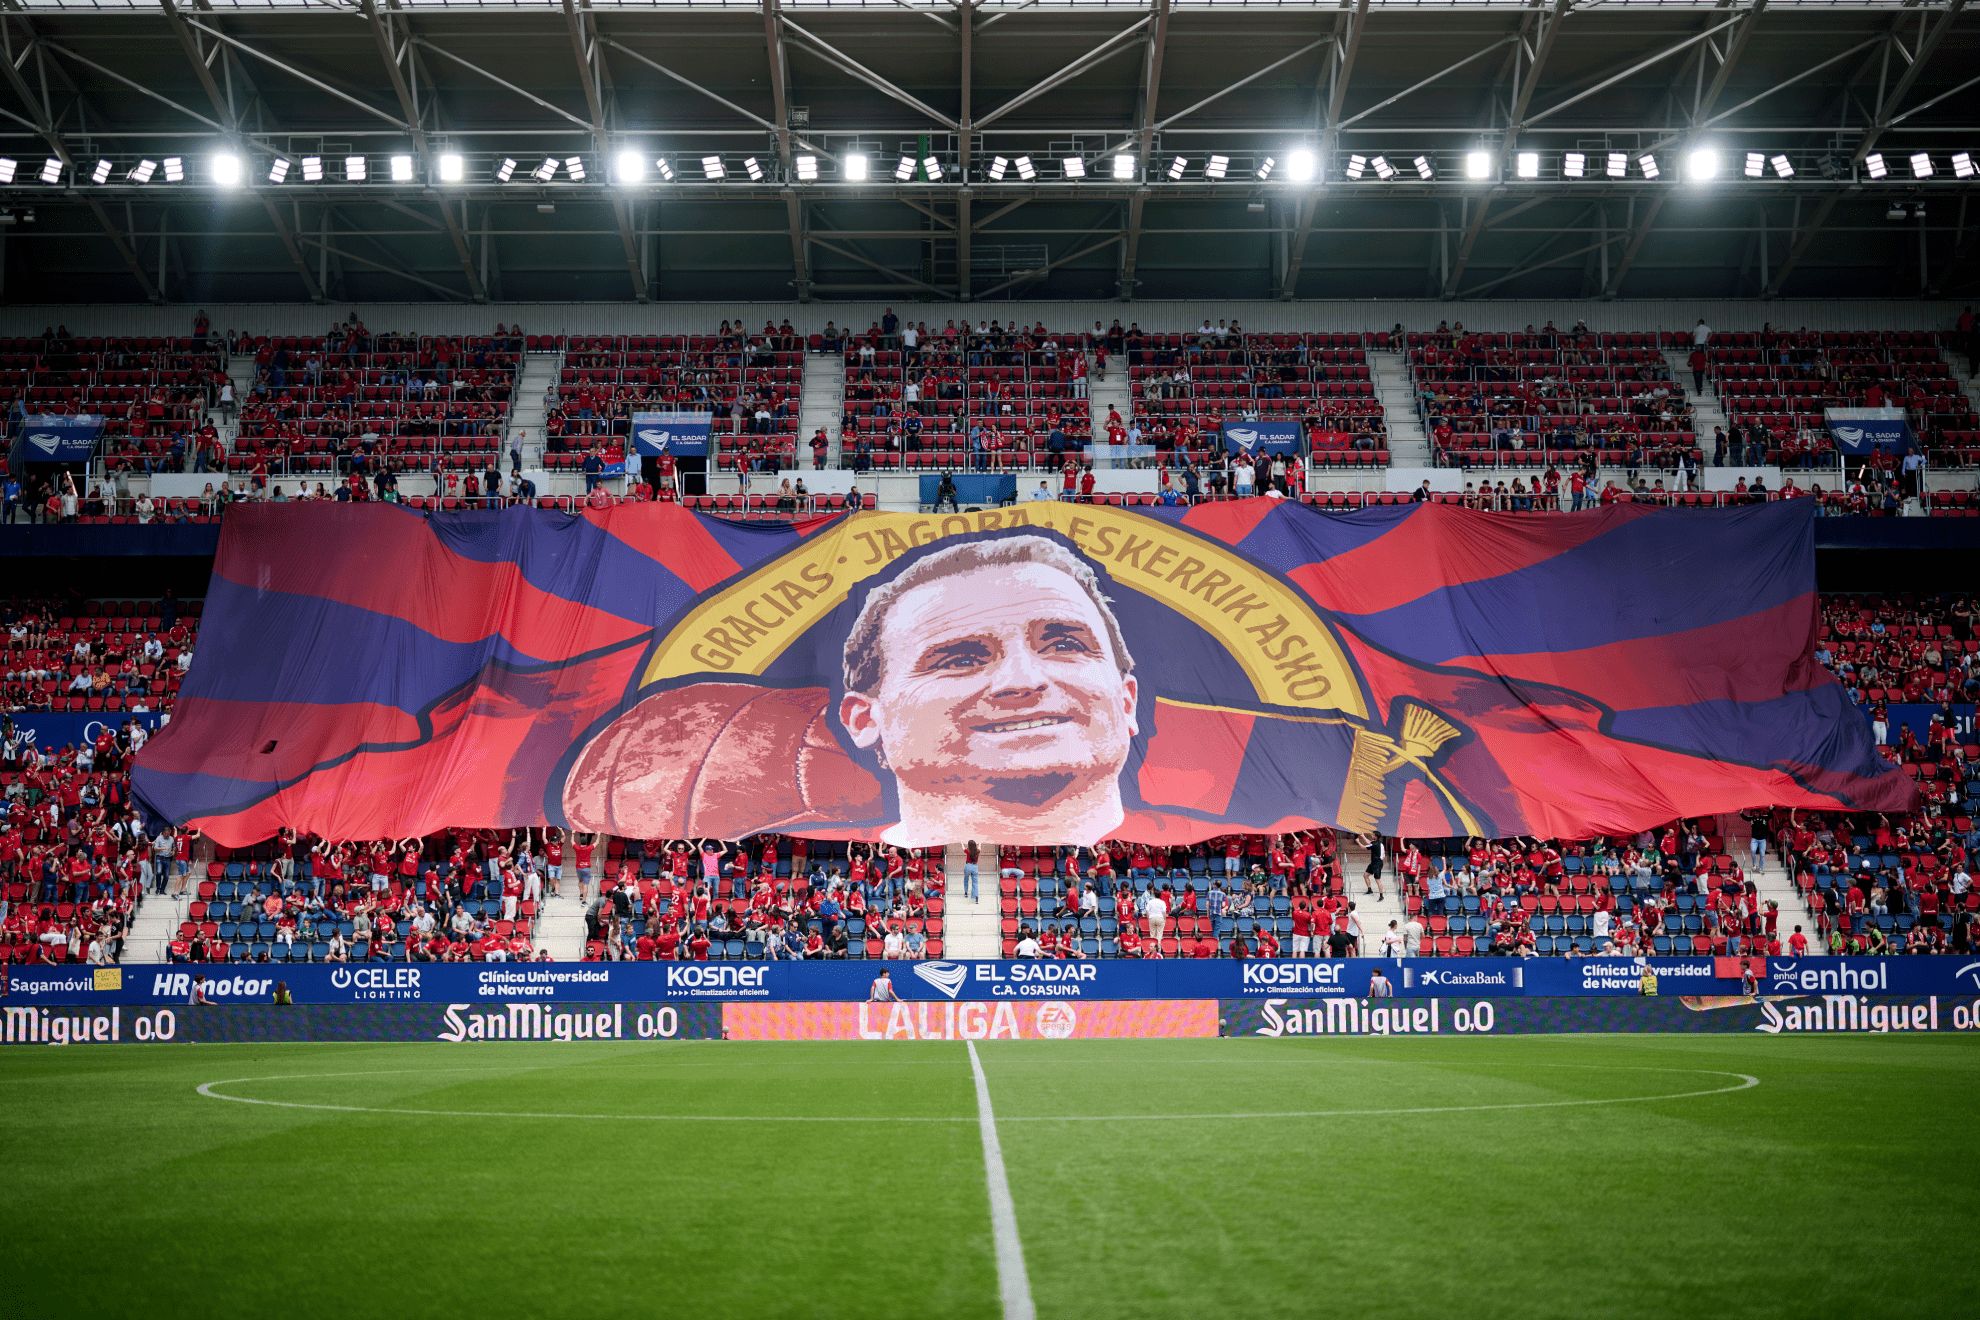 Season in review: Osasuna bid farewell to Jagoba Arrasate after tricky final campaign